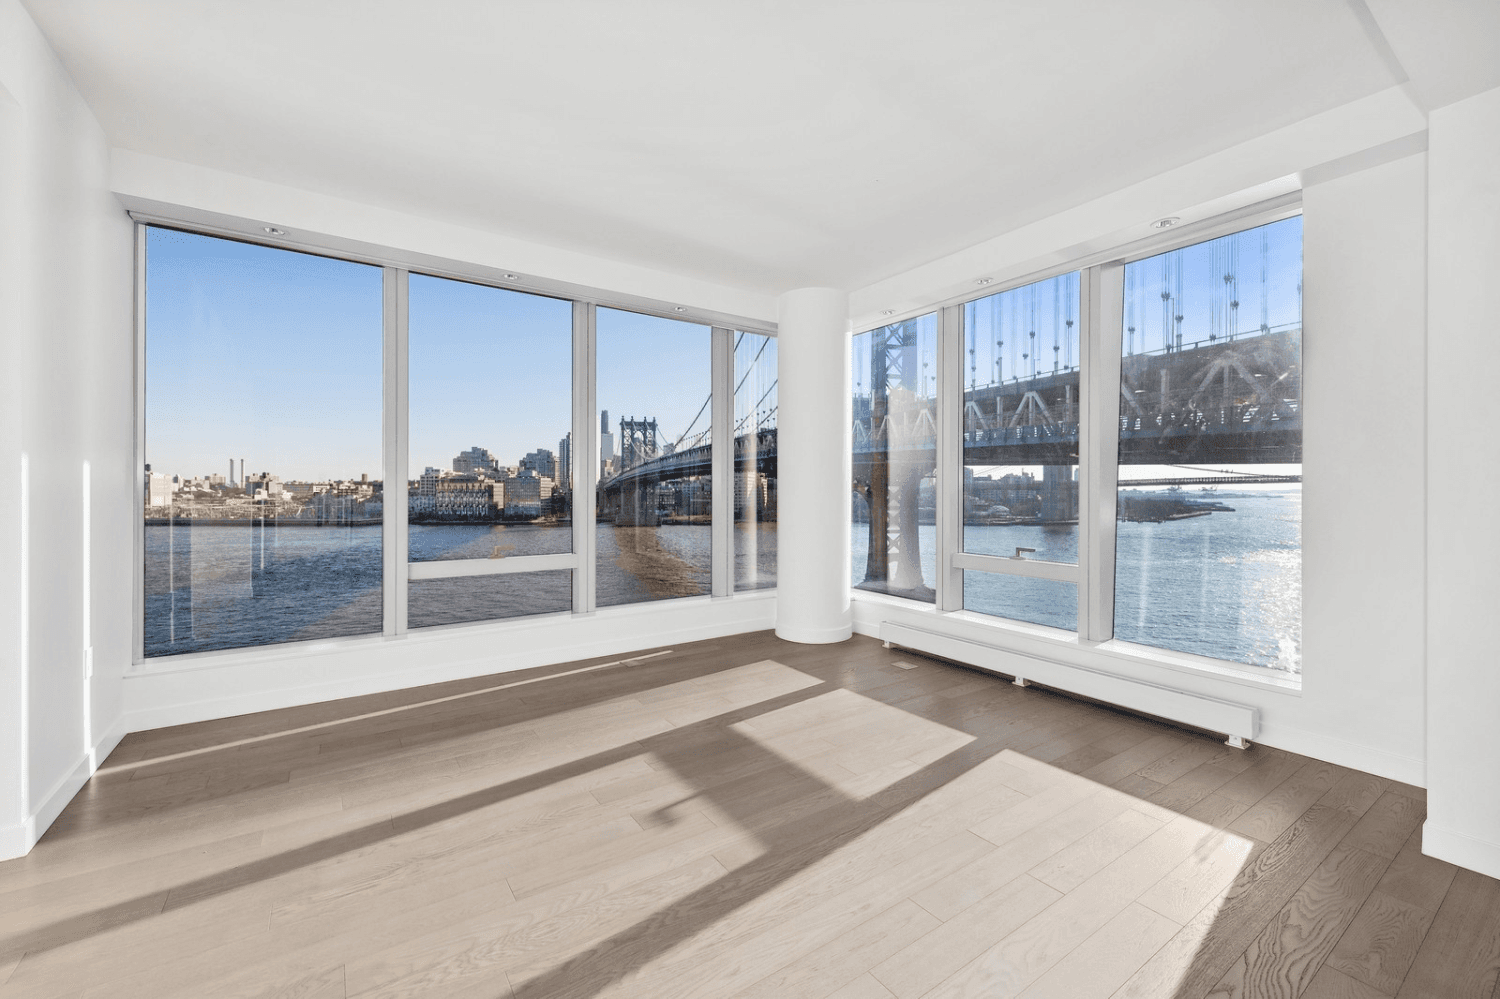 Waterfront Living Two Bedroom Condo at One Manhattan SquareCome home to this sun drenched corner two bedroom, two bath home with stunning views of the East River and Manhattan Bridge ...